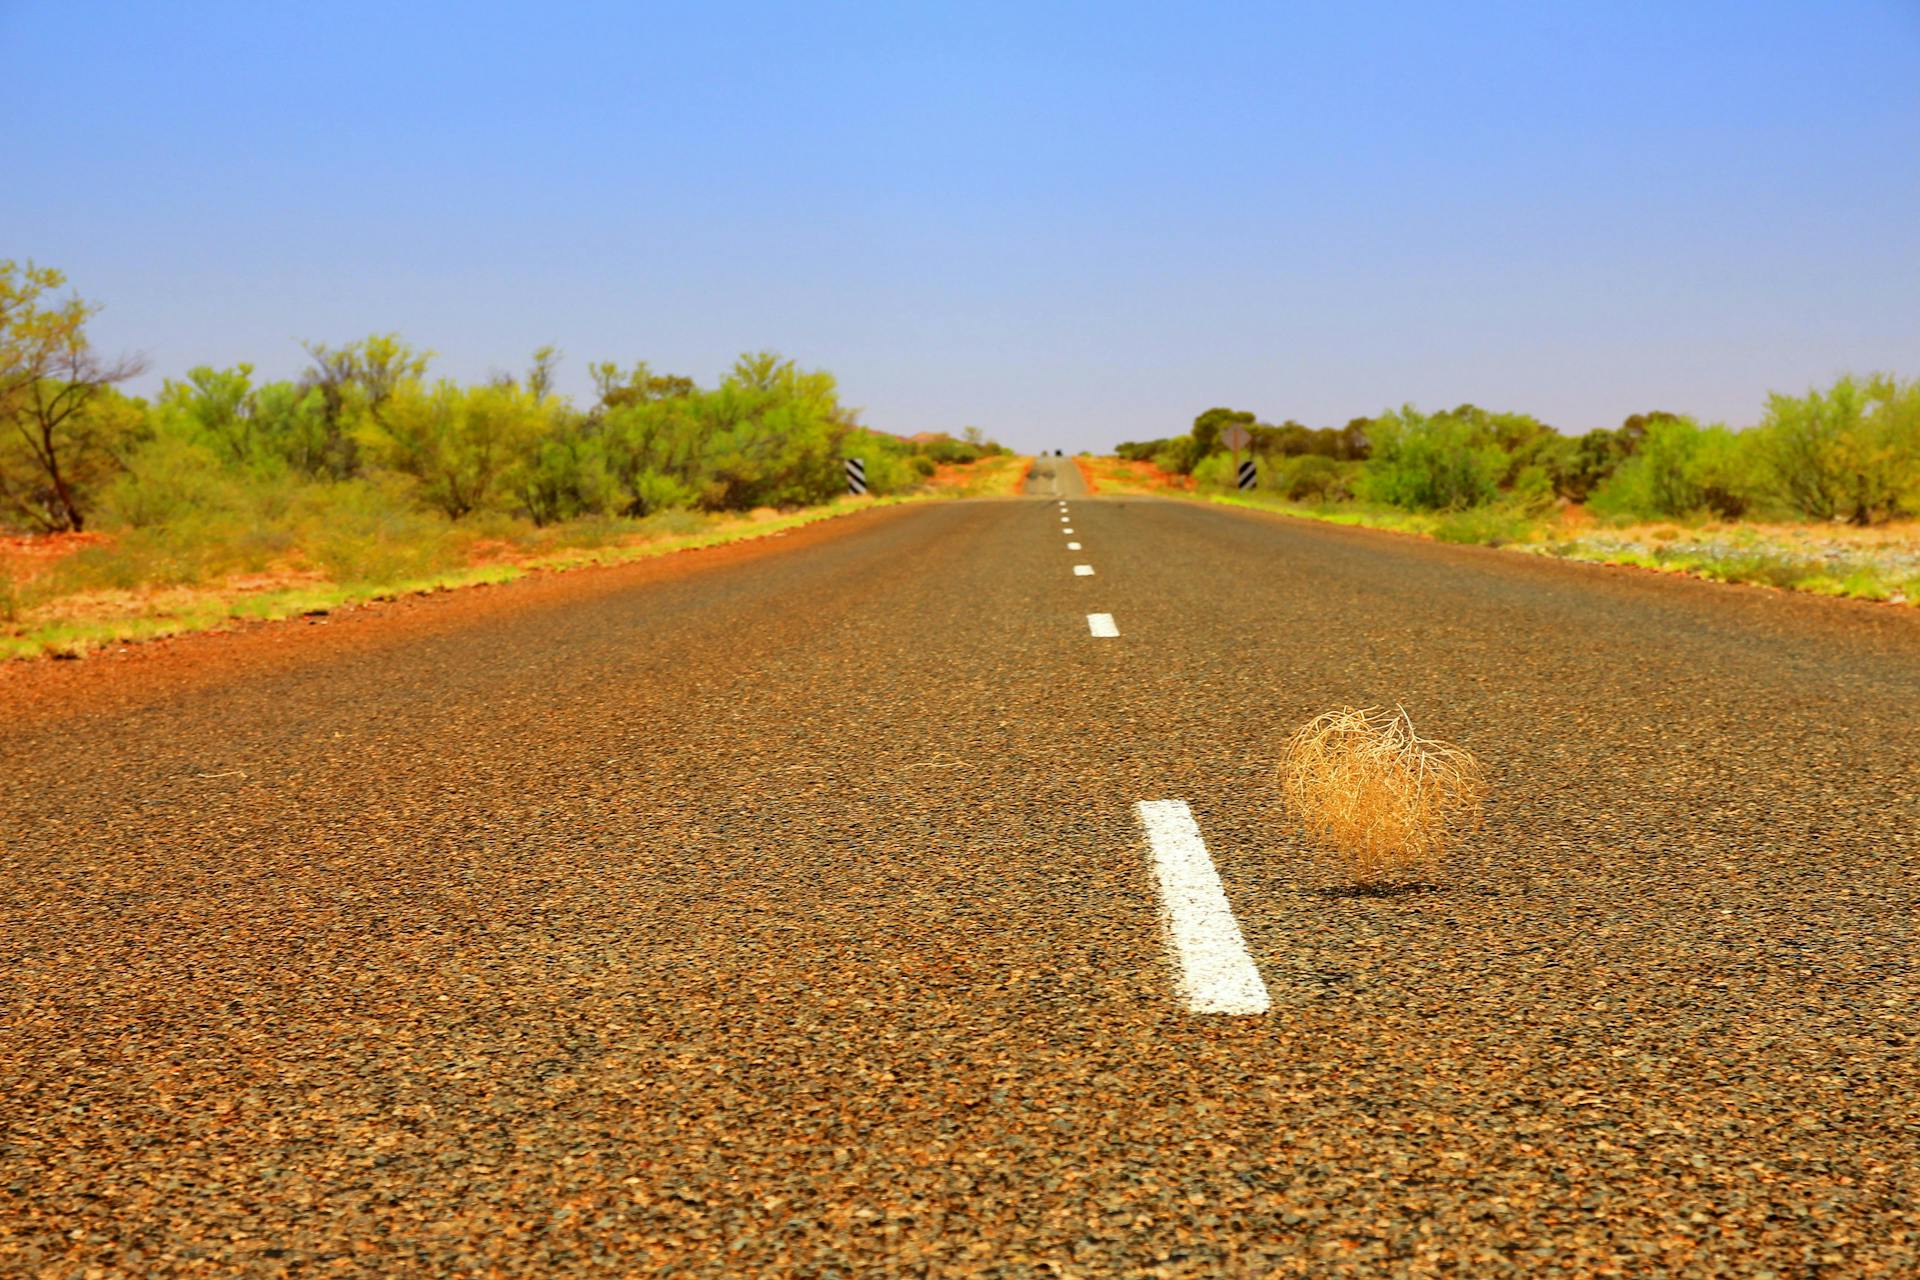 A tumble weed rolling across highway